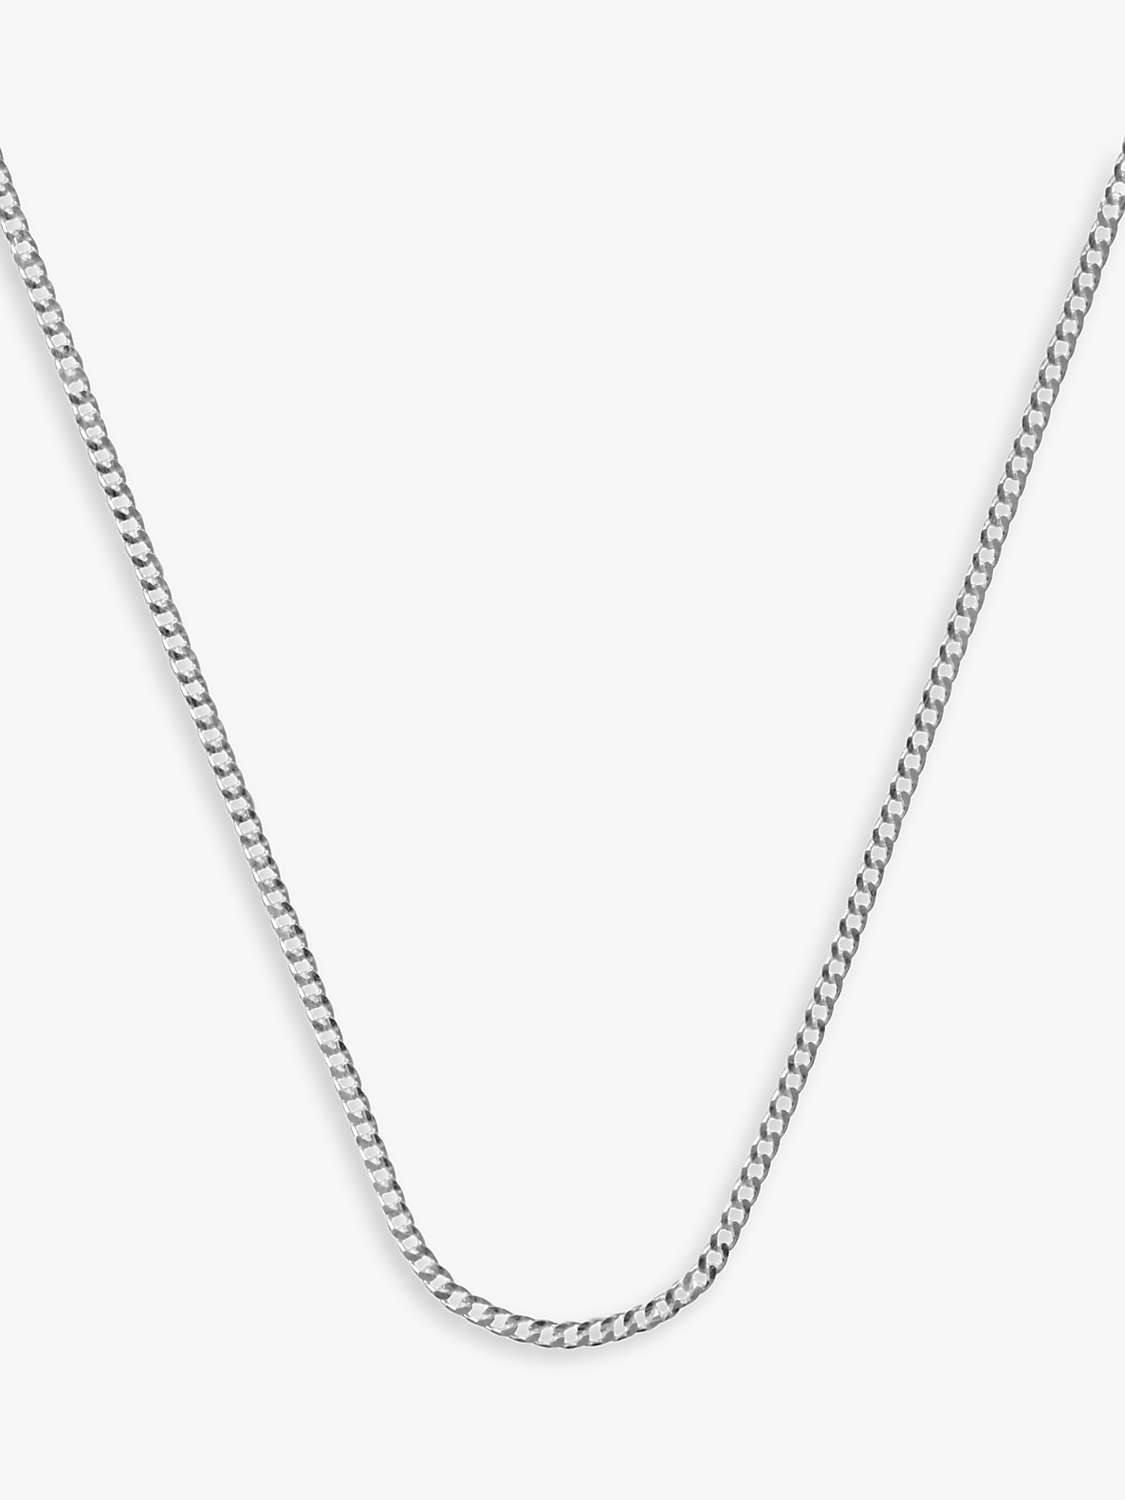 Buy Nina B Curb Chain Necklace, Silver Online at johnlewis.com